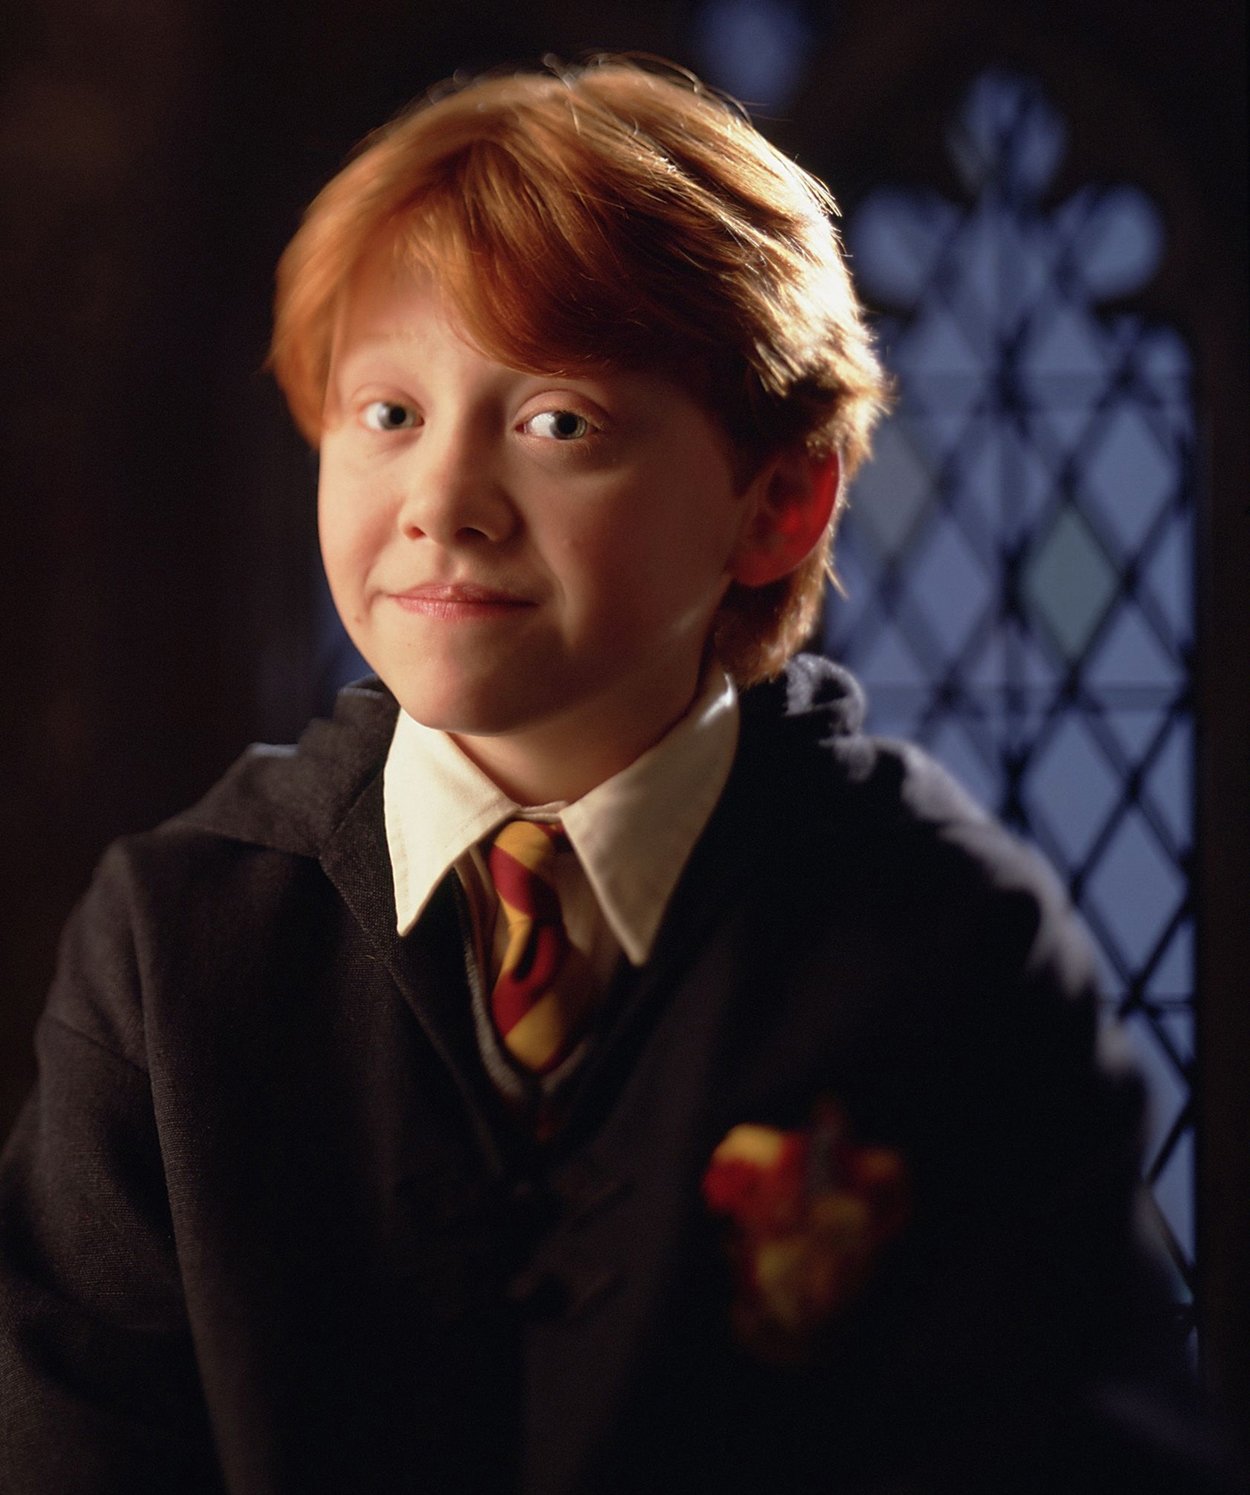 Rupert Alexander Lloyd Grint was 13 years old when Harry Potter and the Philosopher's Stone was released in November 2001